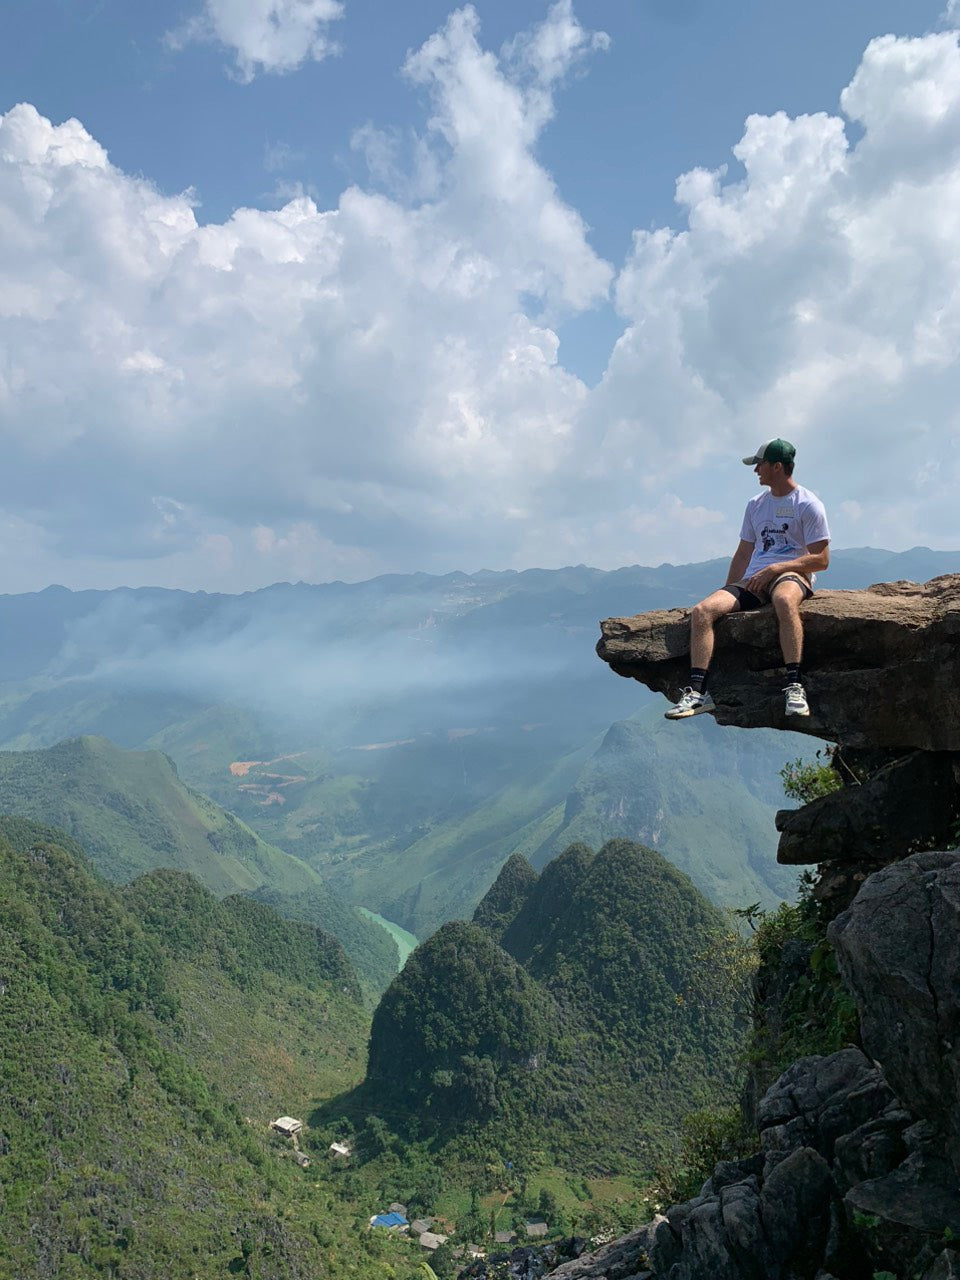 HGD2: Ha Giang Loop, 4 DAYS 3 Nights (Ride Pillion With A Friend)